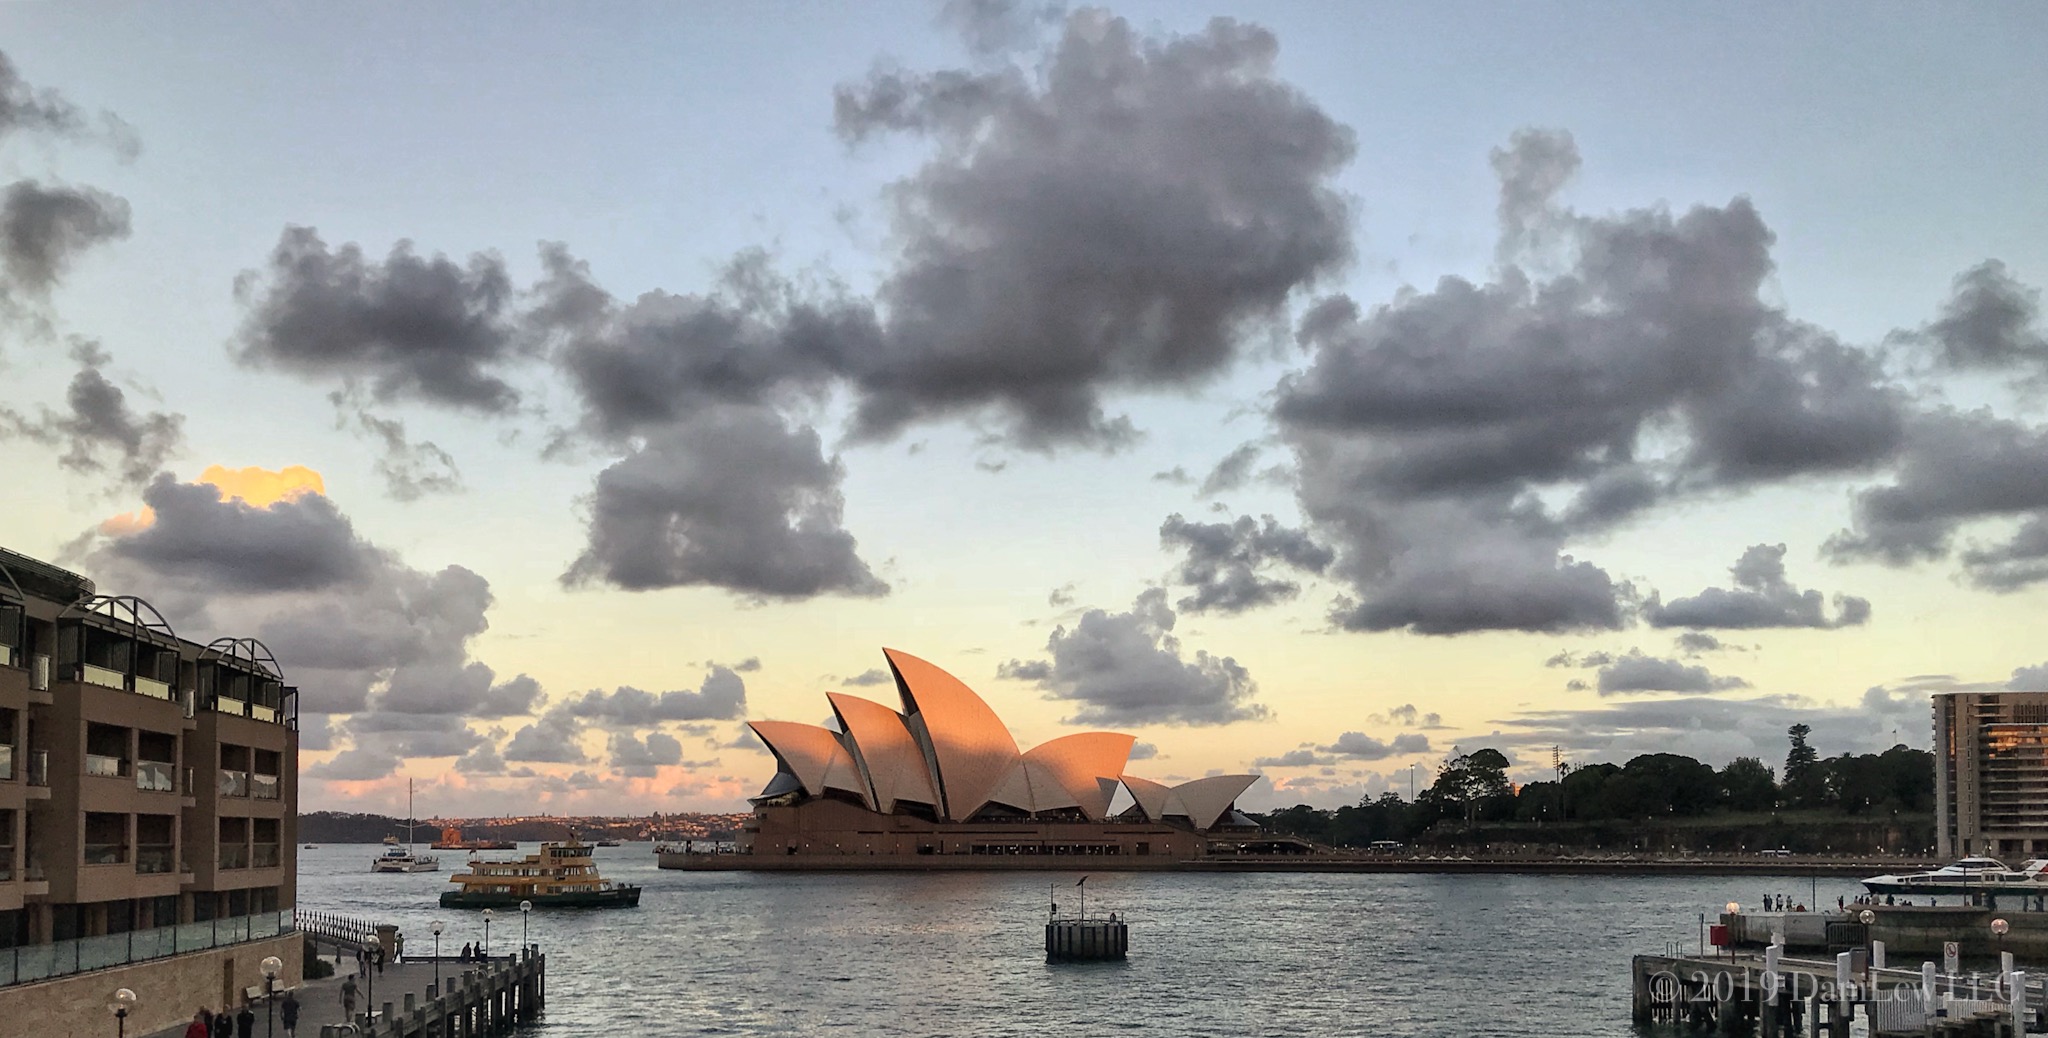 Sydney Opera House Sunrise as viewed from the Park Hyatt - image taken with an iPhone 7